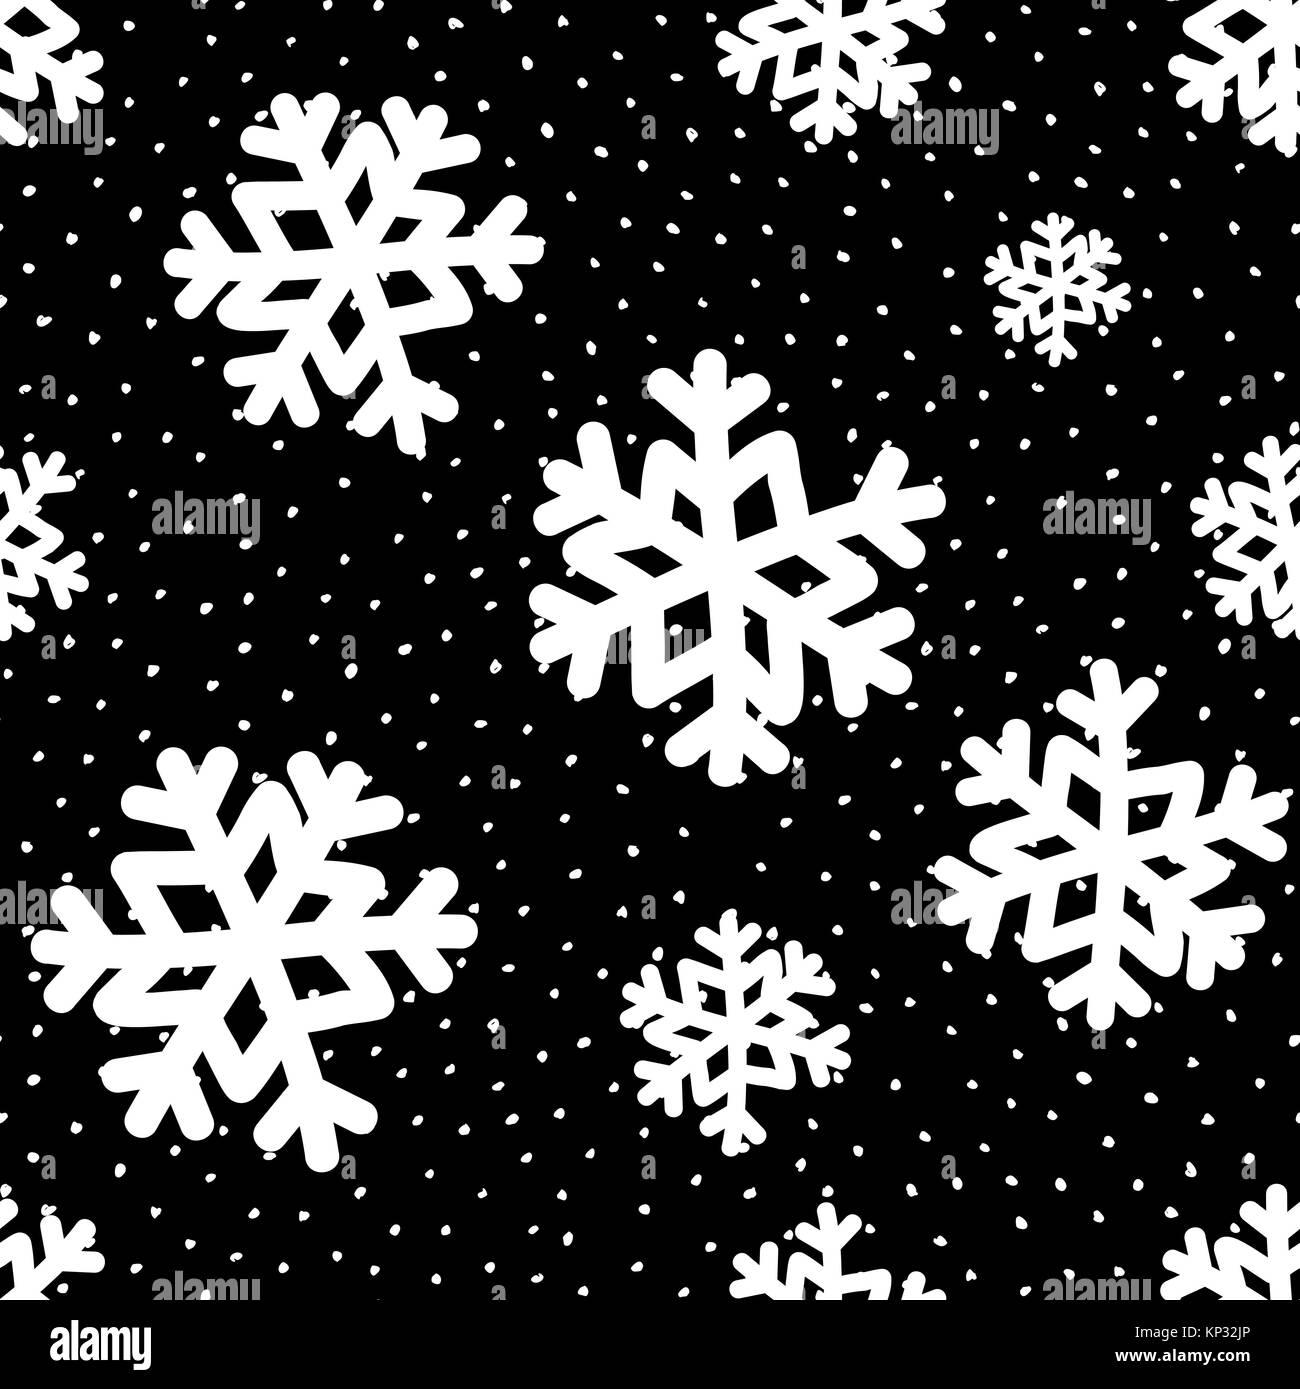 Seamless repeating pattern with white snowflakes on black